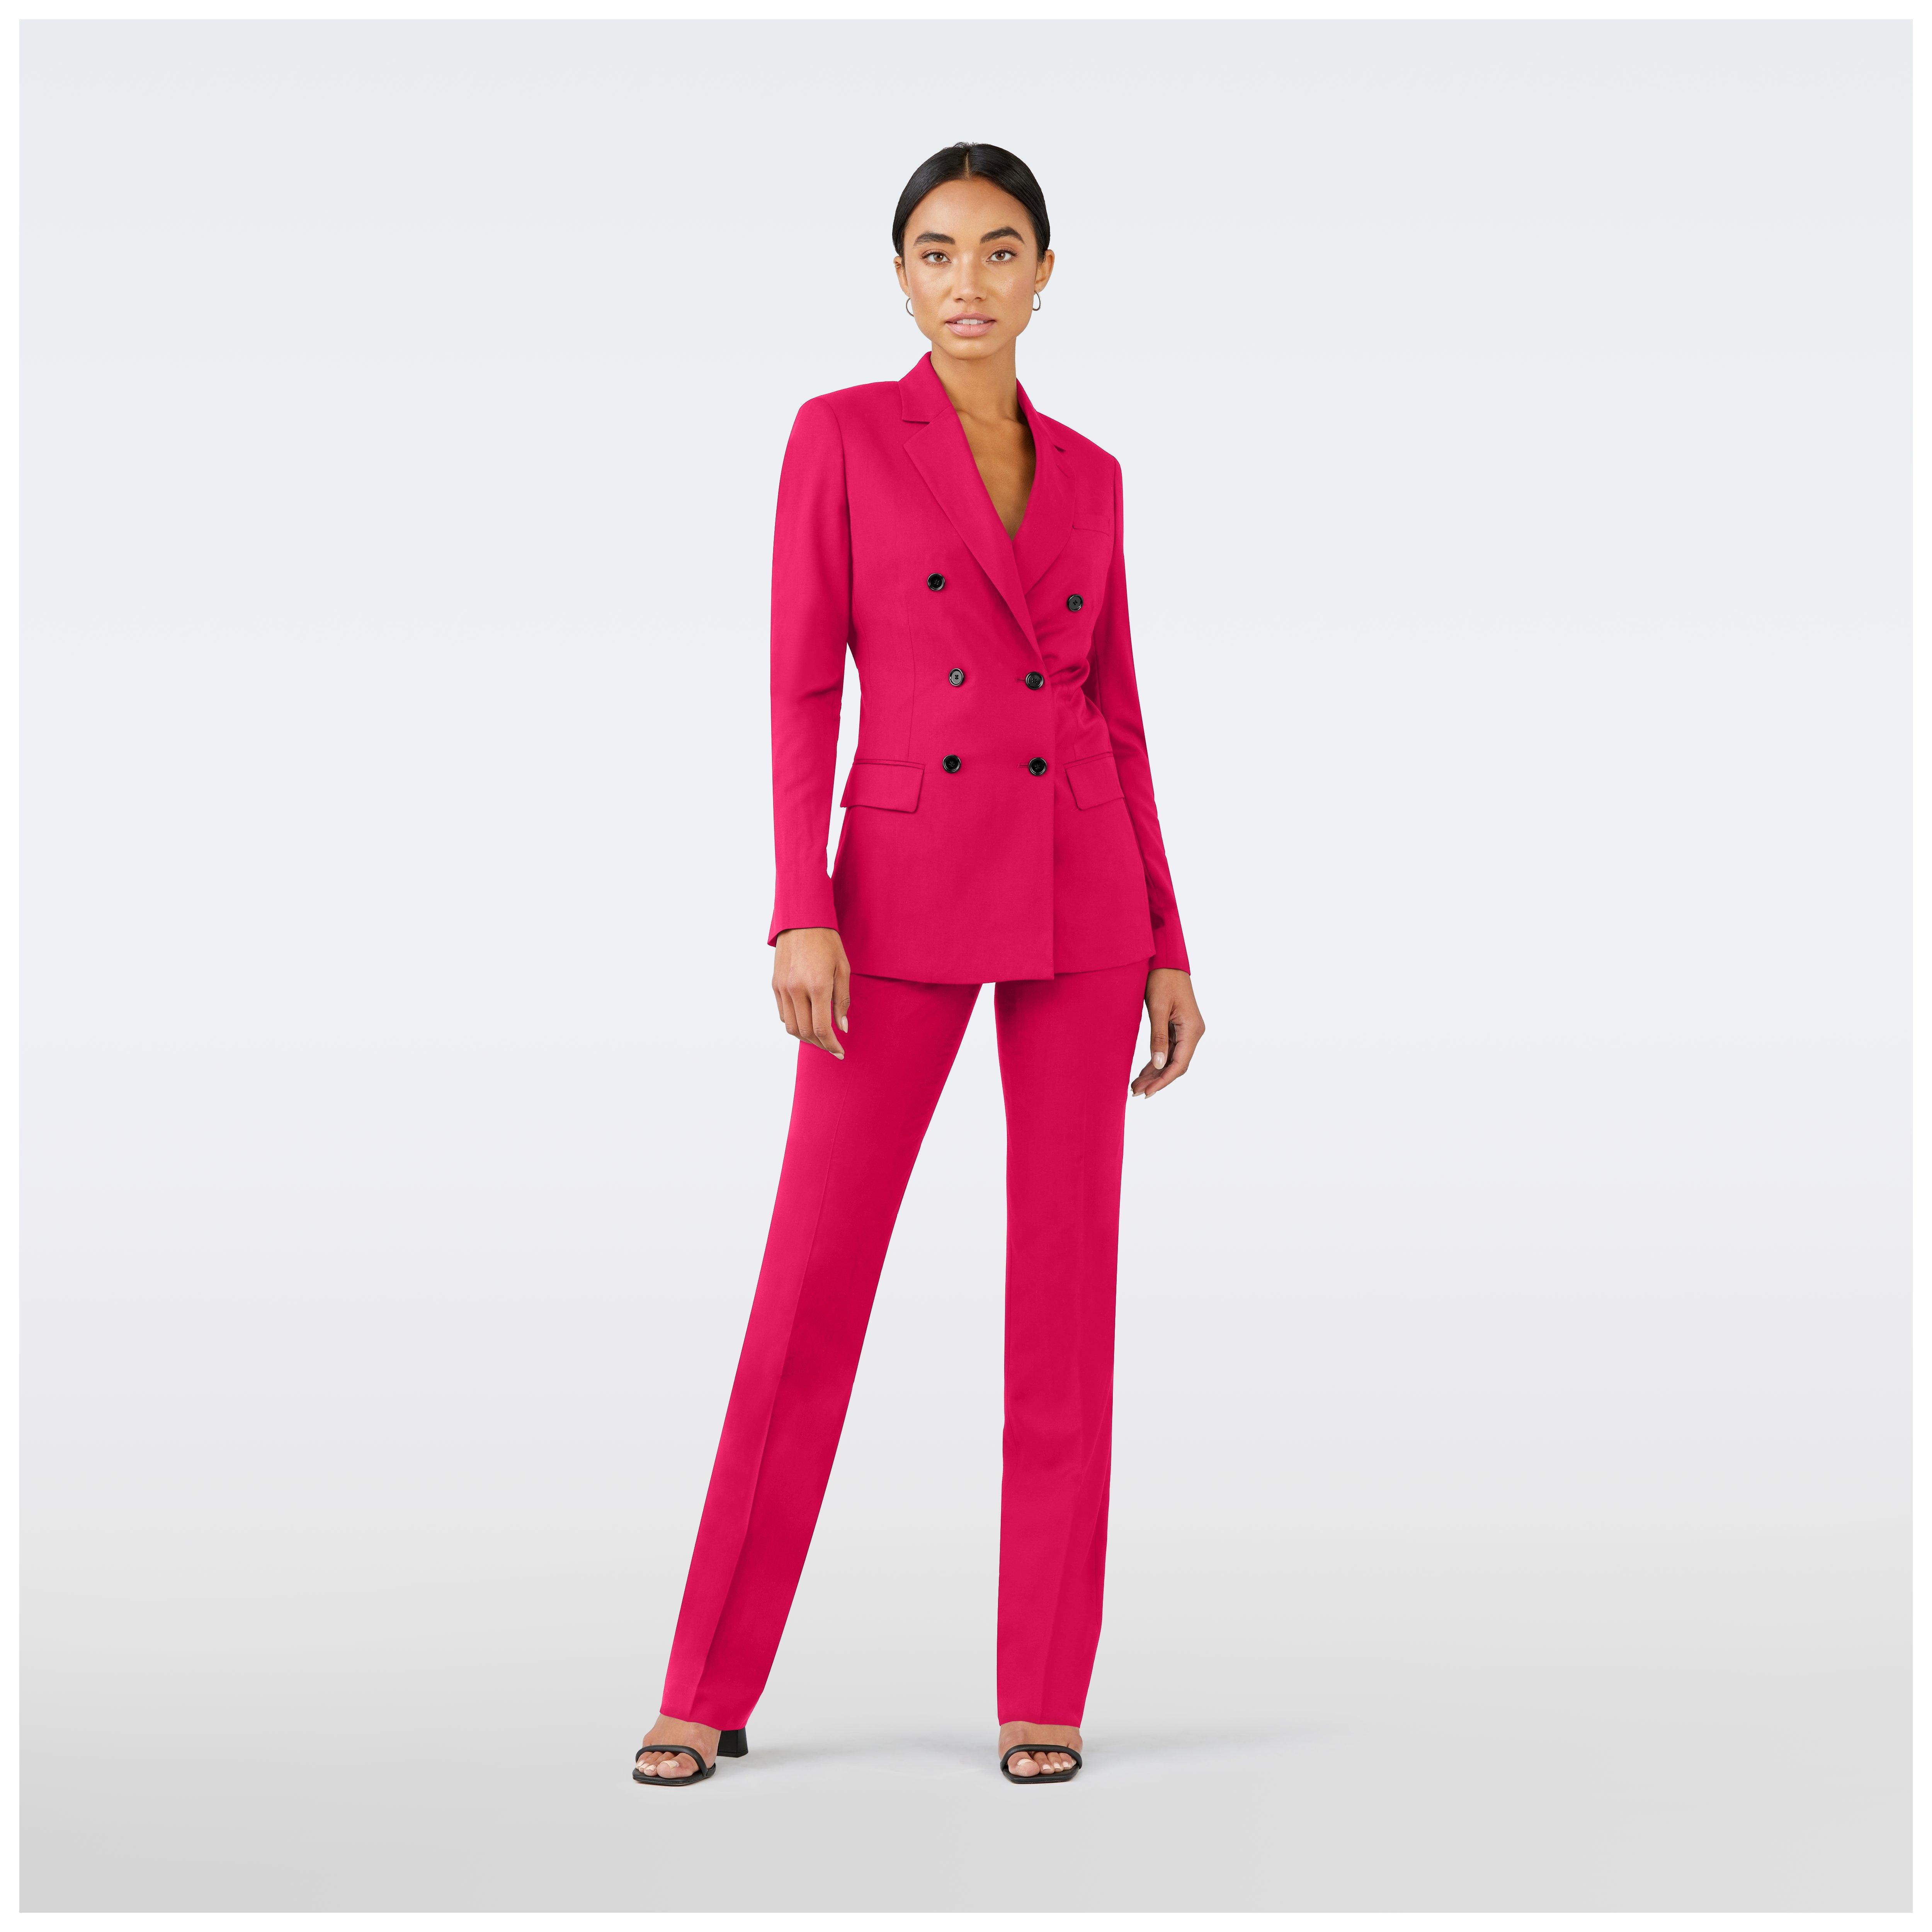 Custom Made One Button Elegant Womens Leisure Pink Suit Womens For Formal  Office And Evening Wear From Shinesia_zoe, $76.39